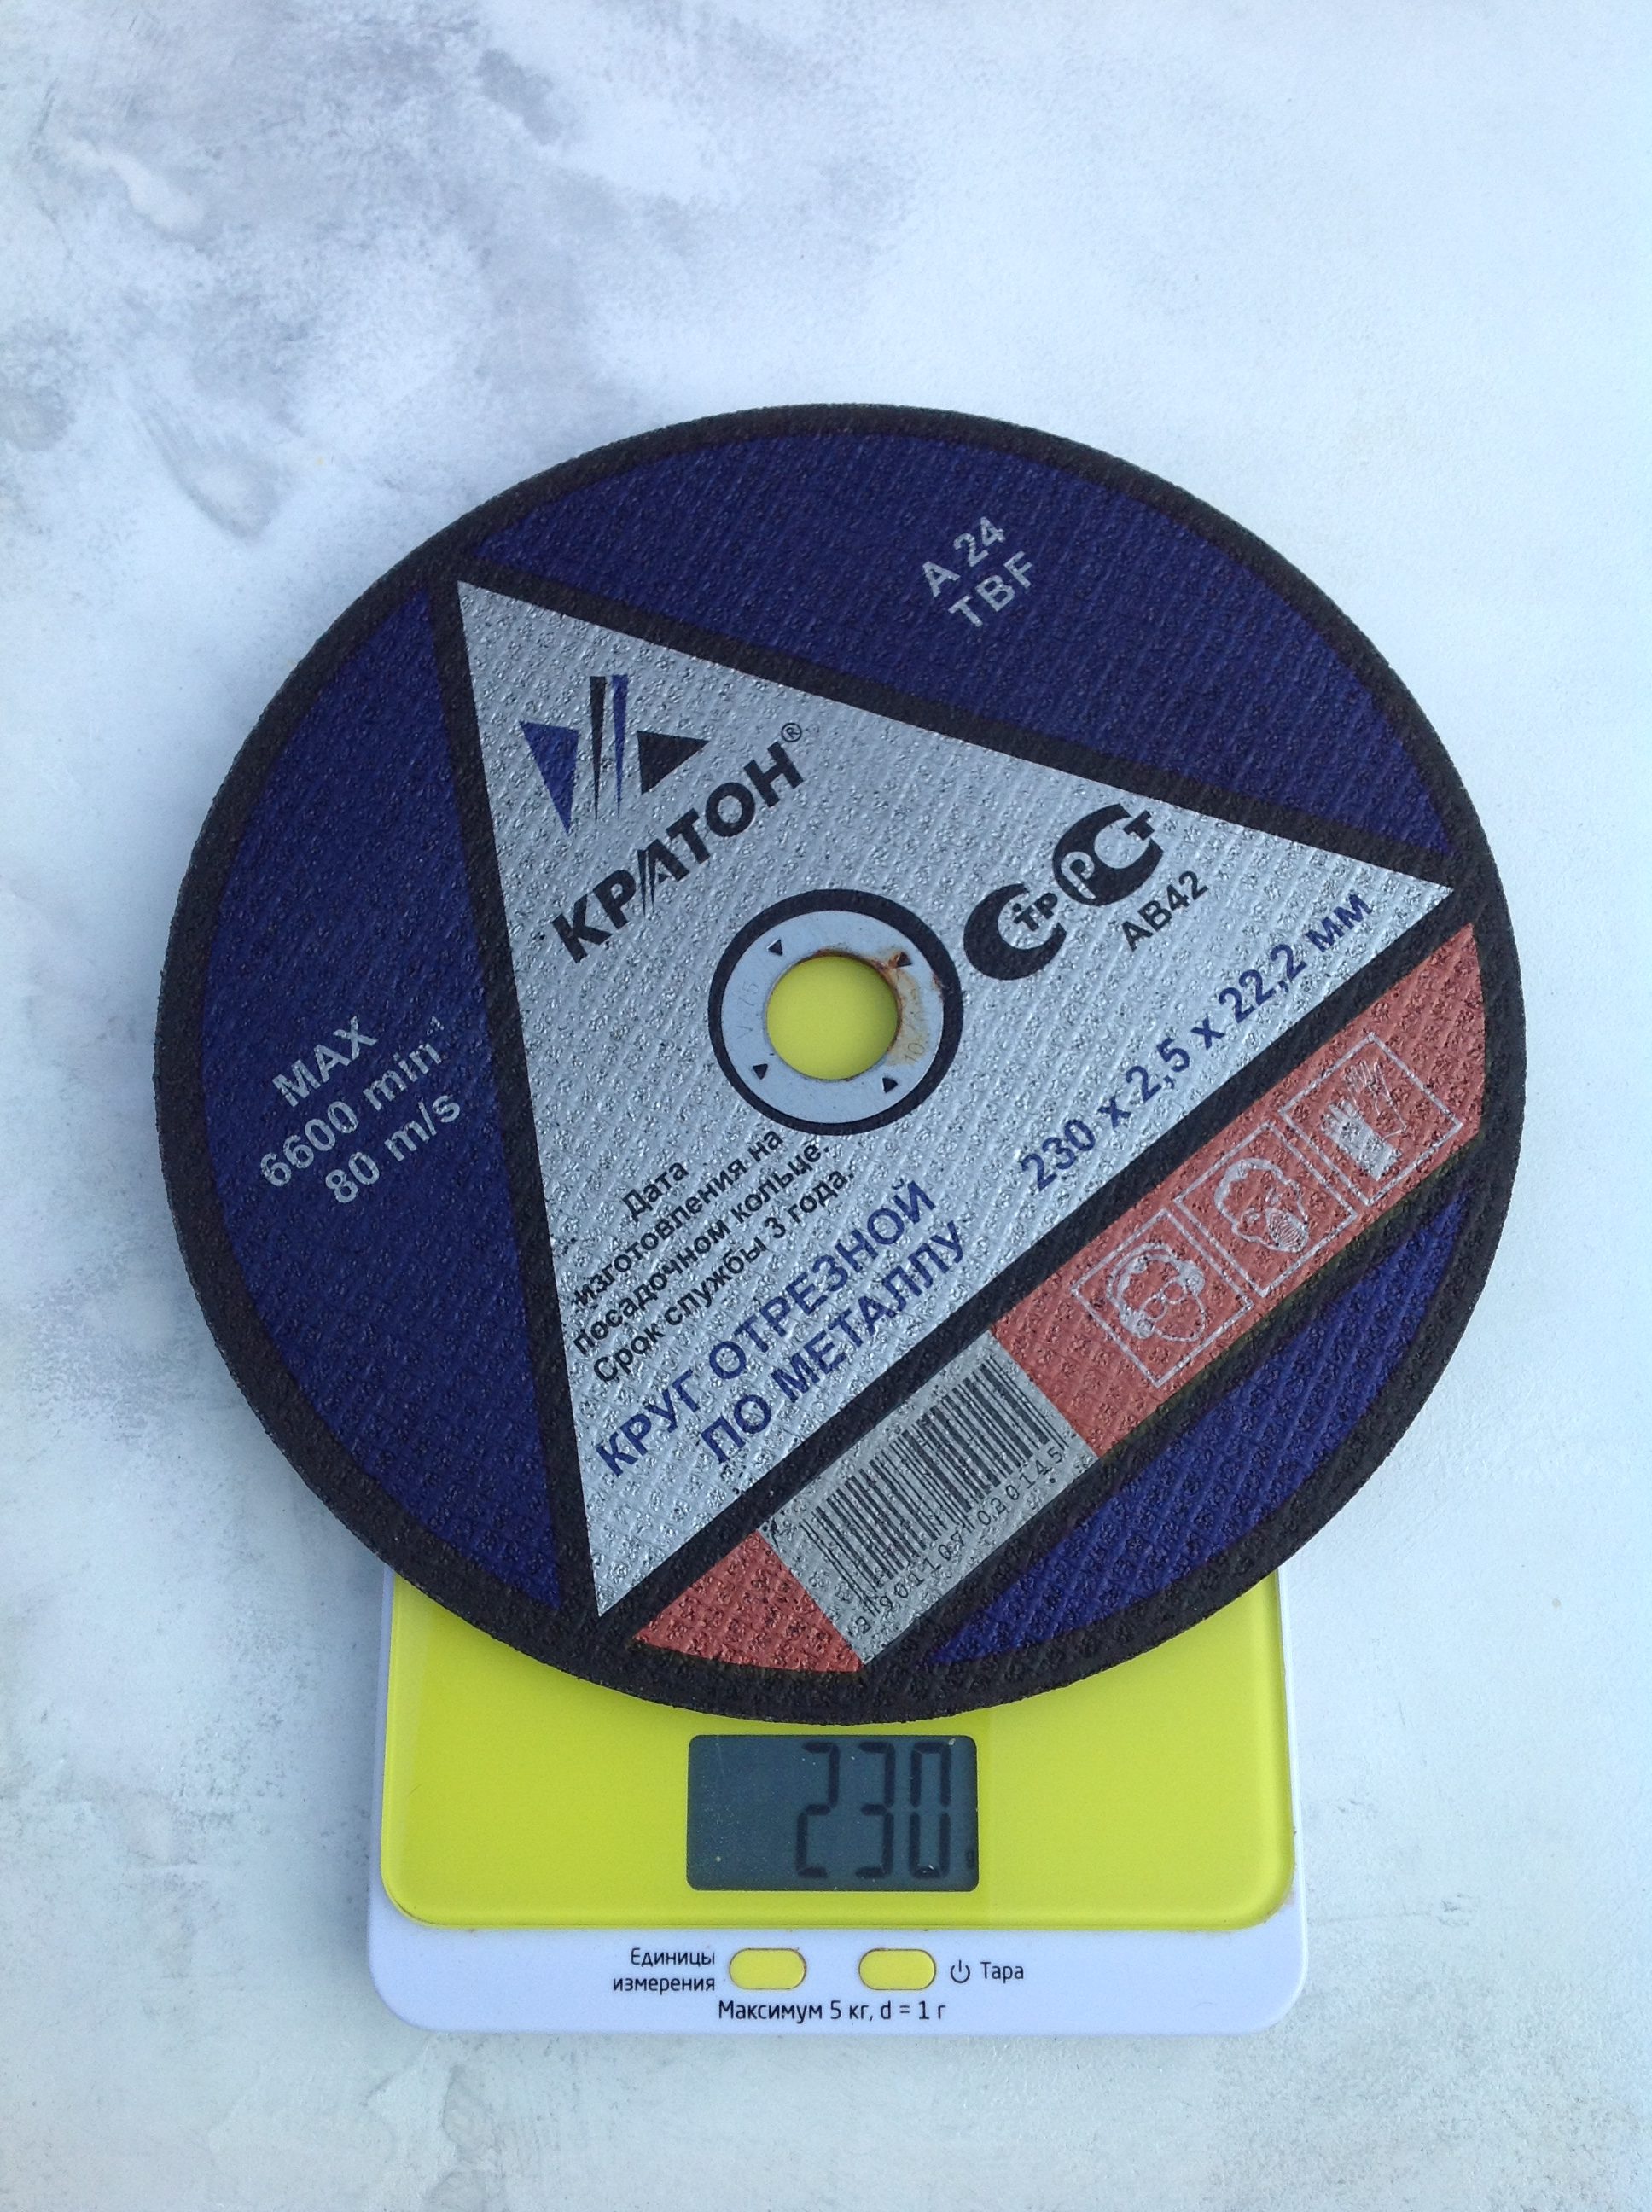 weight of metal cutting disc